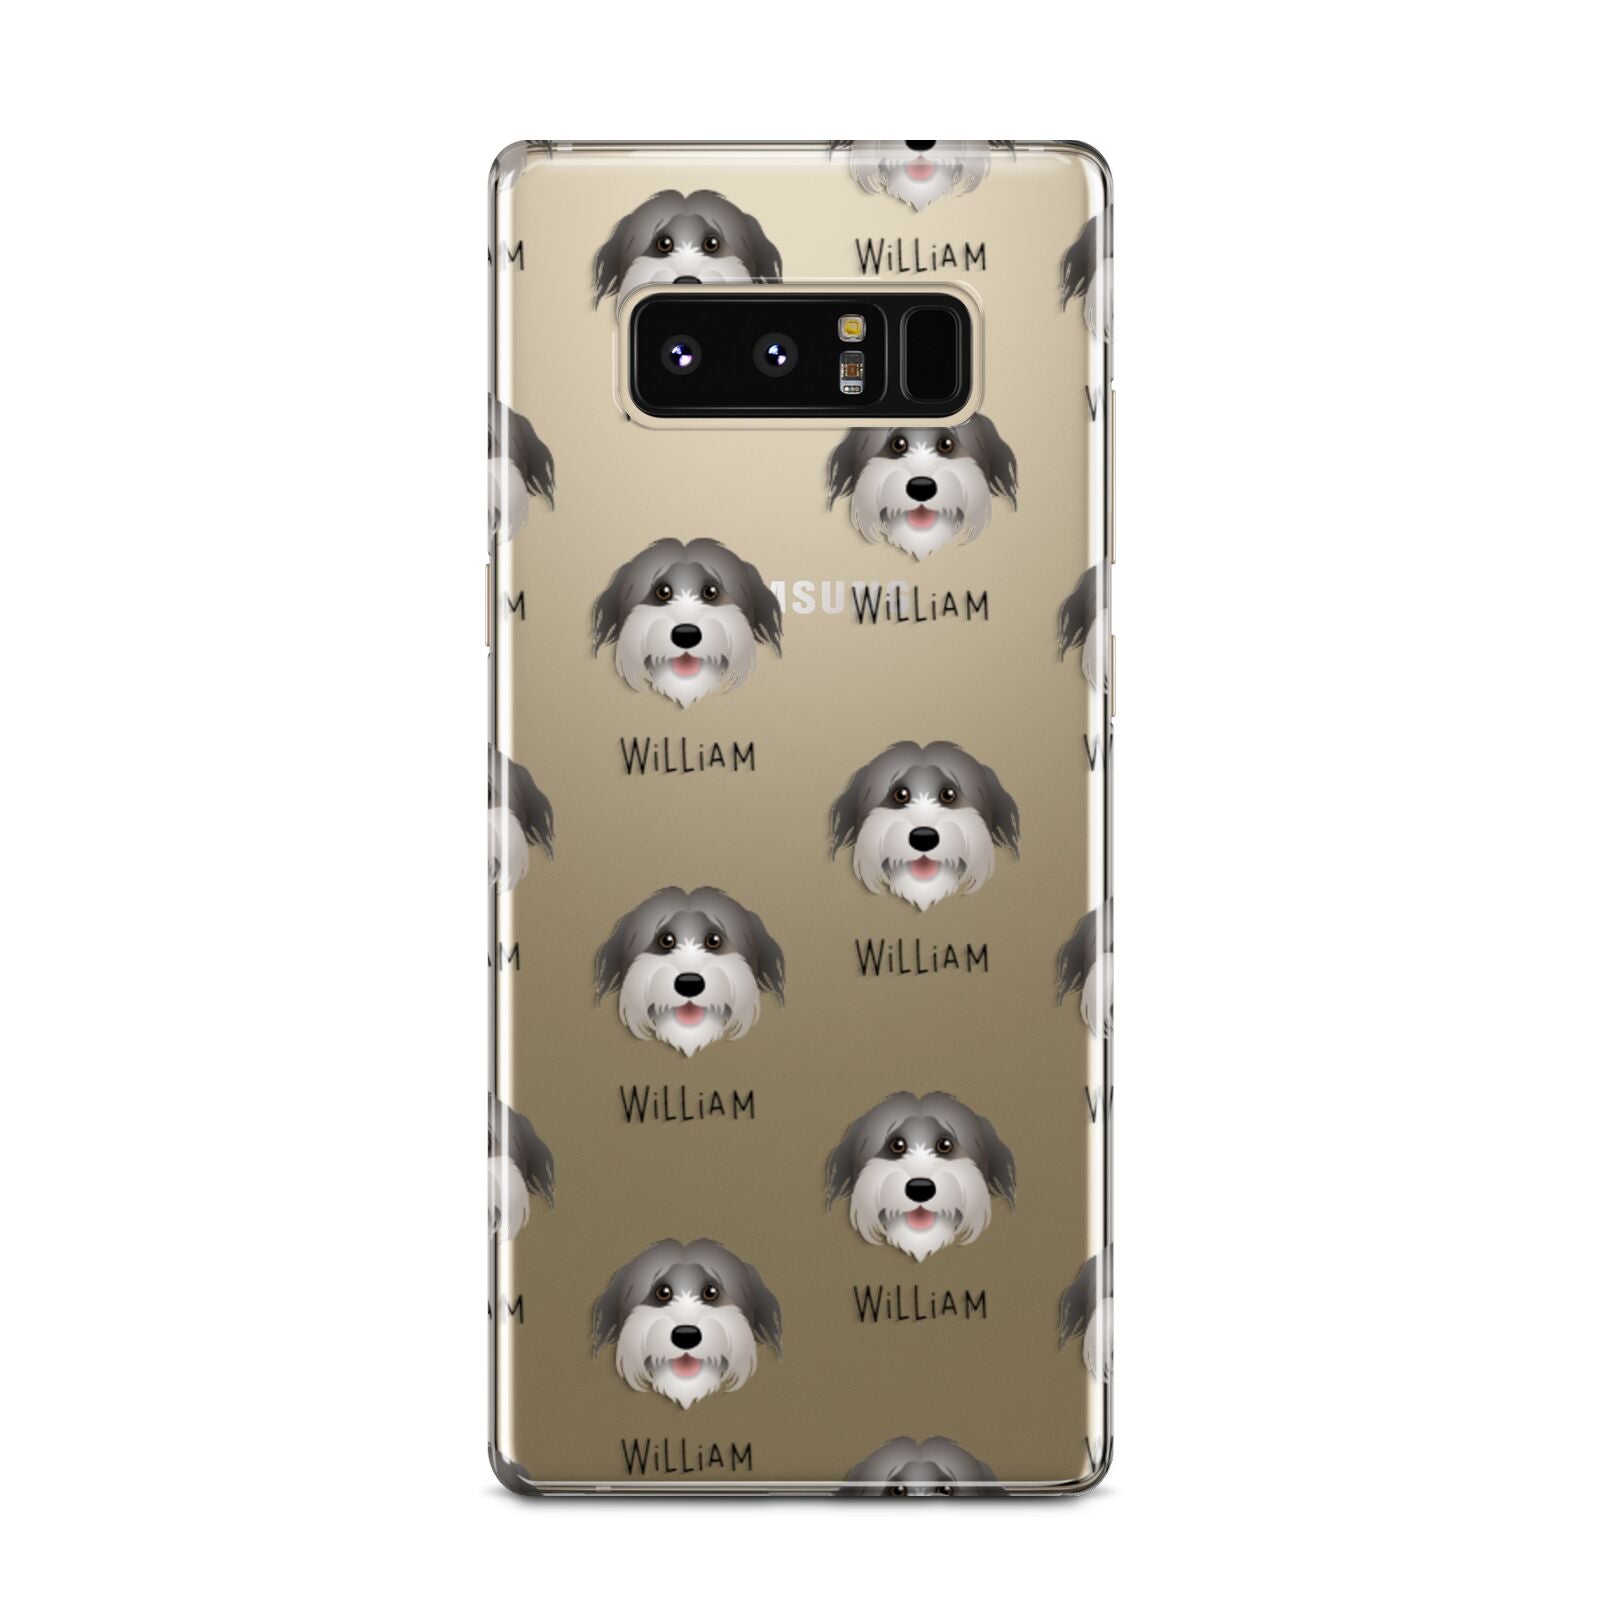 Pyrenean Shepherd Icon with Name Samsung Galaxy Note 8 Case